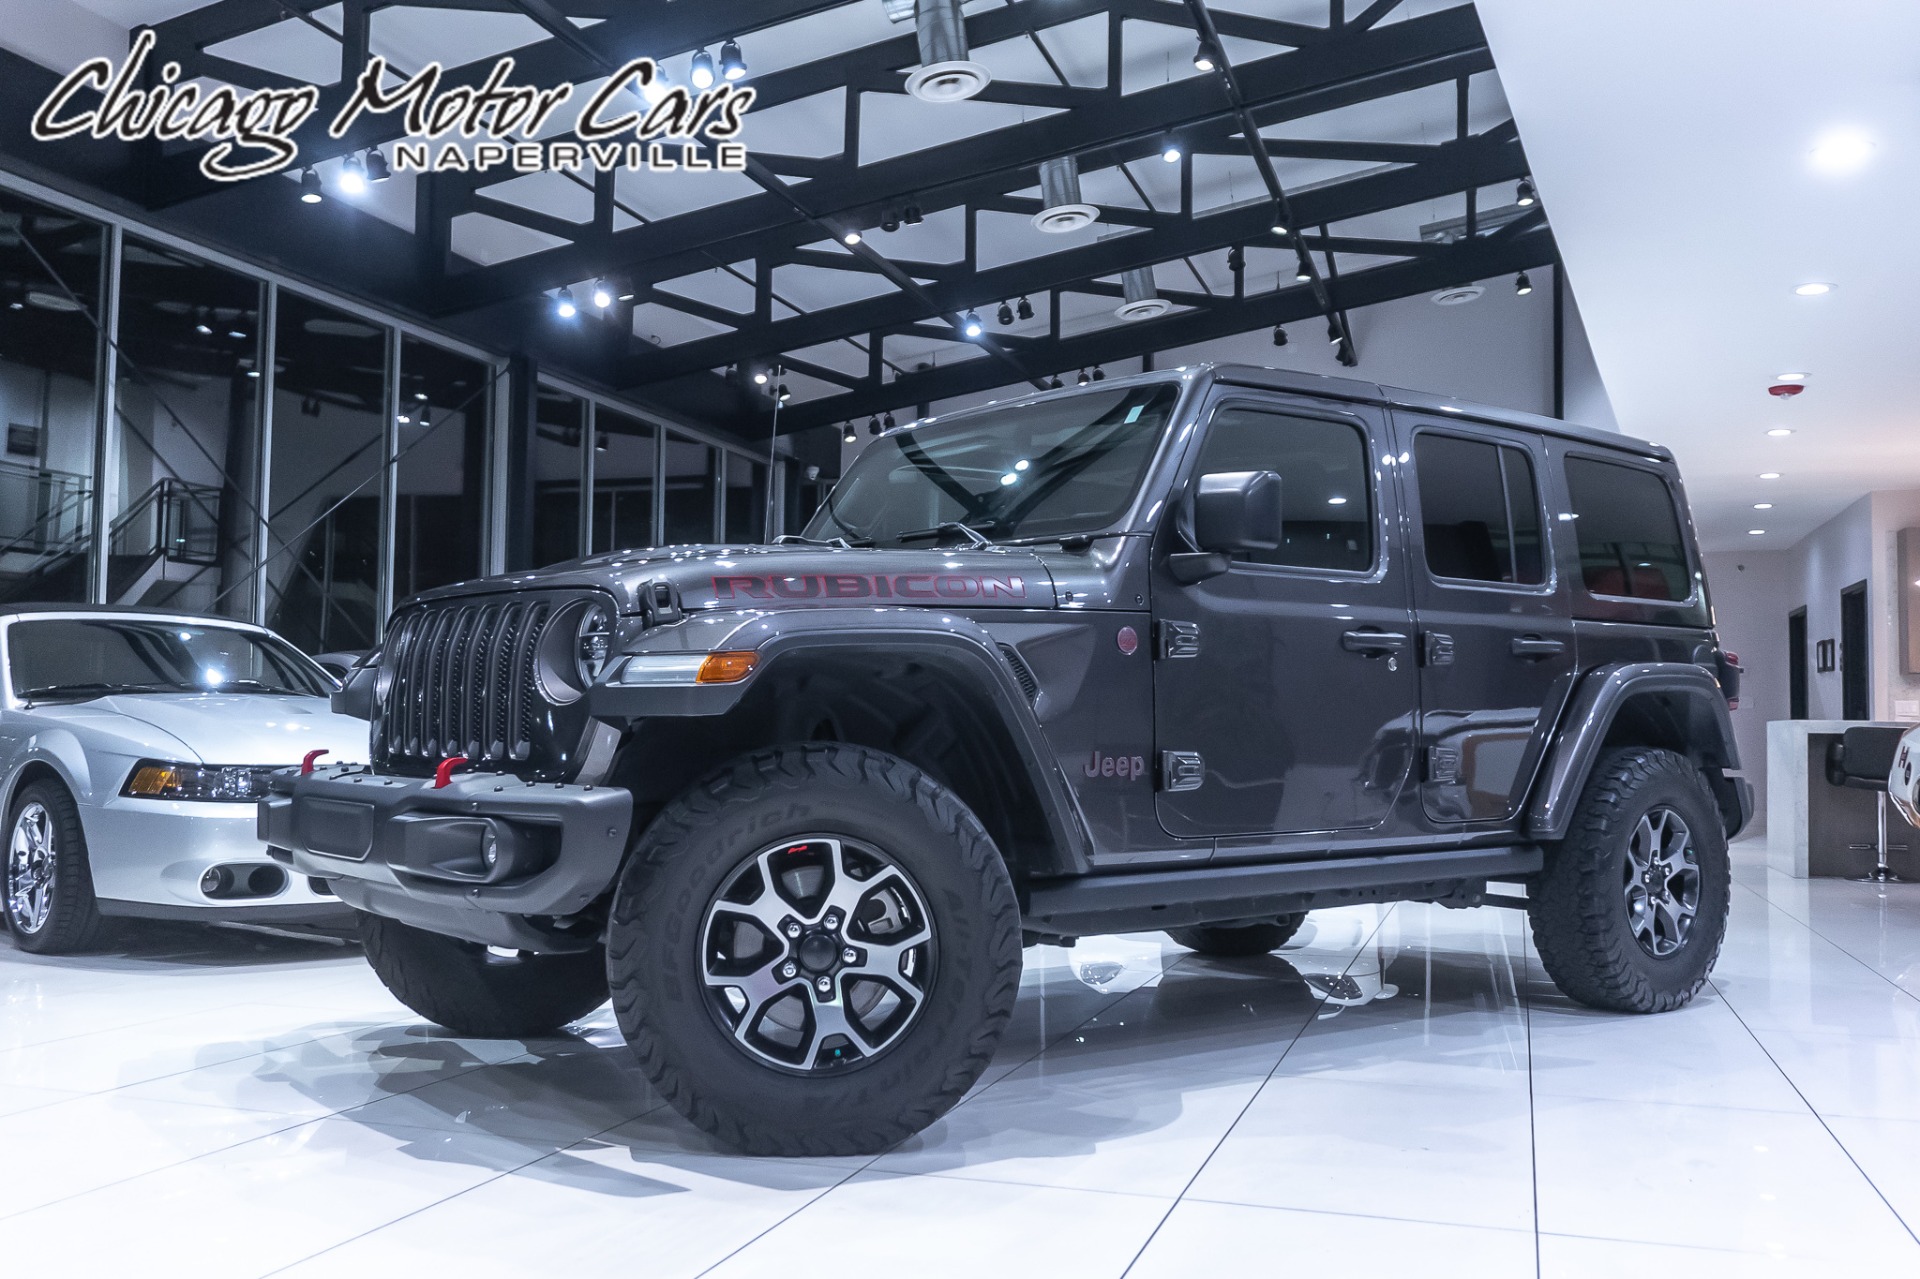 Used-2018-Jeep-Wrangler-Unlimited-Rubicon-V6-4X4-LED-Lighting-Package-Body-Color-Hard-Top-New-Tires